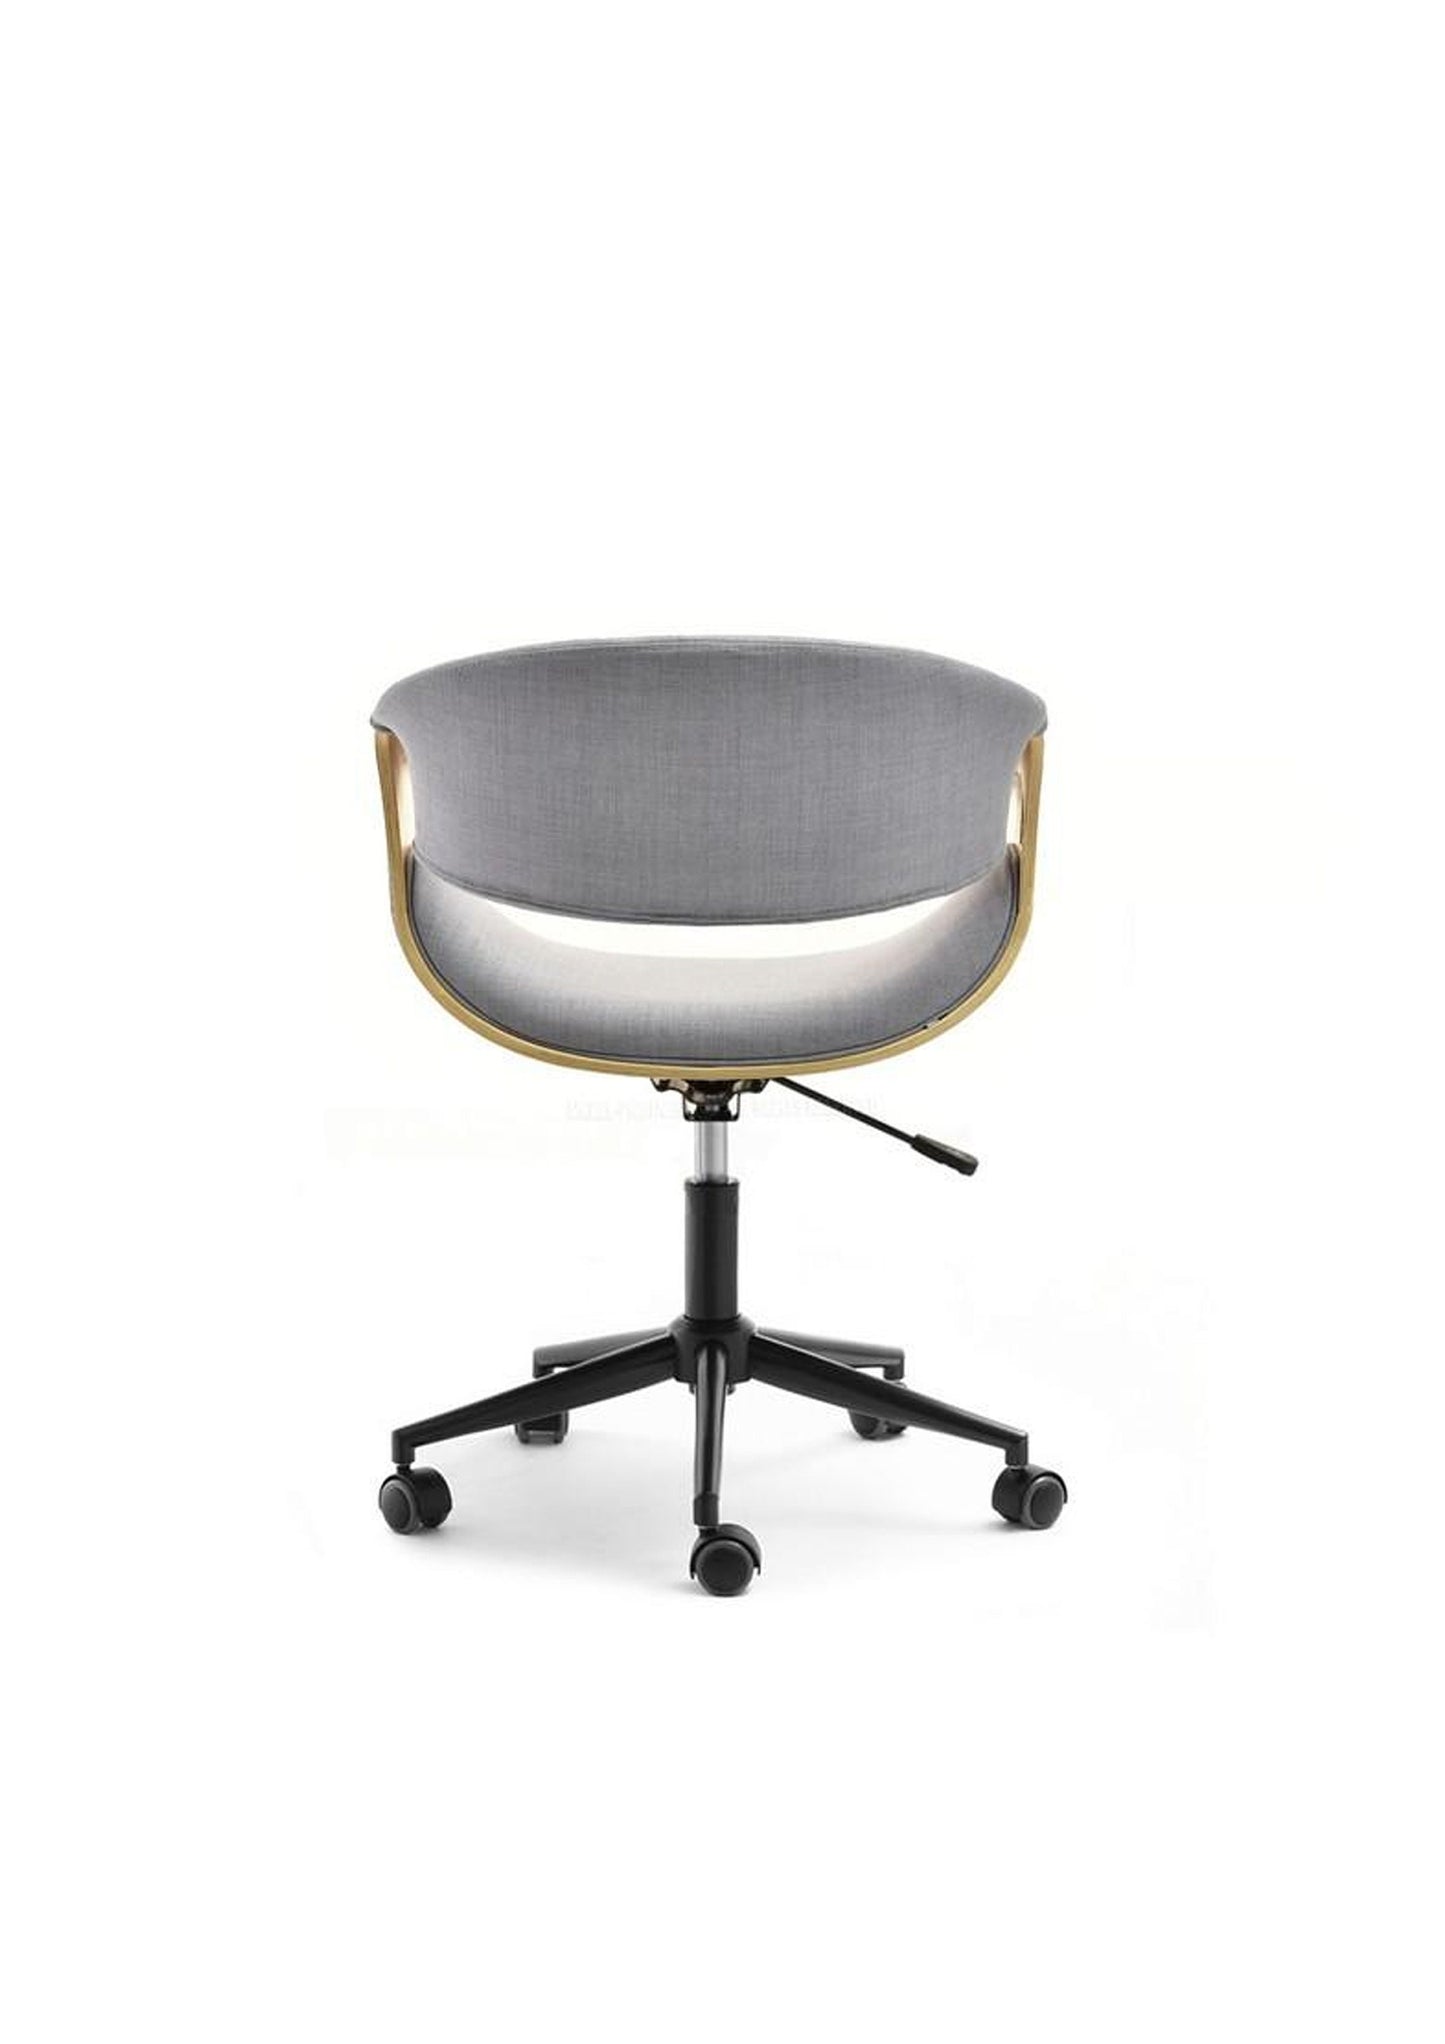 NEW RETRO Style Adjustable Swivel office desk chair grey and pine wood BLACK Base